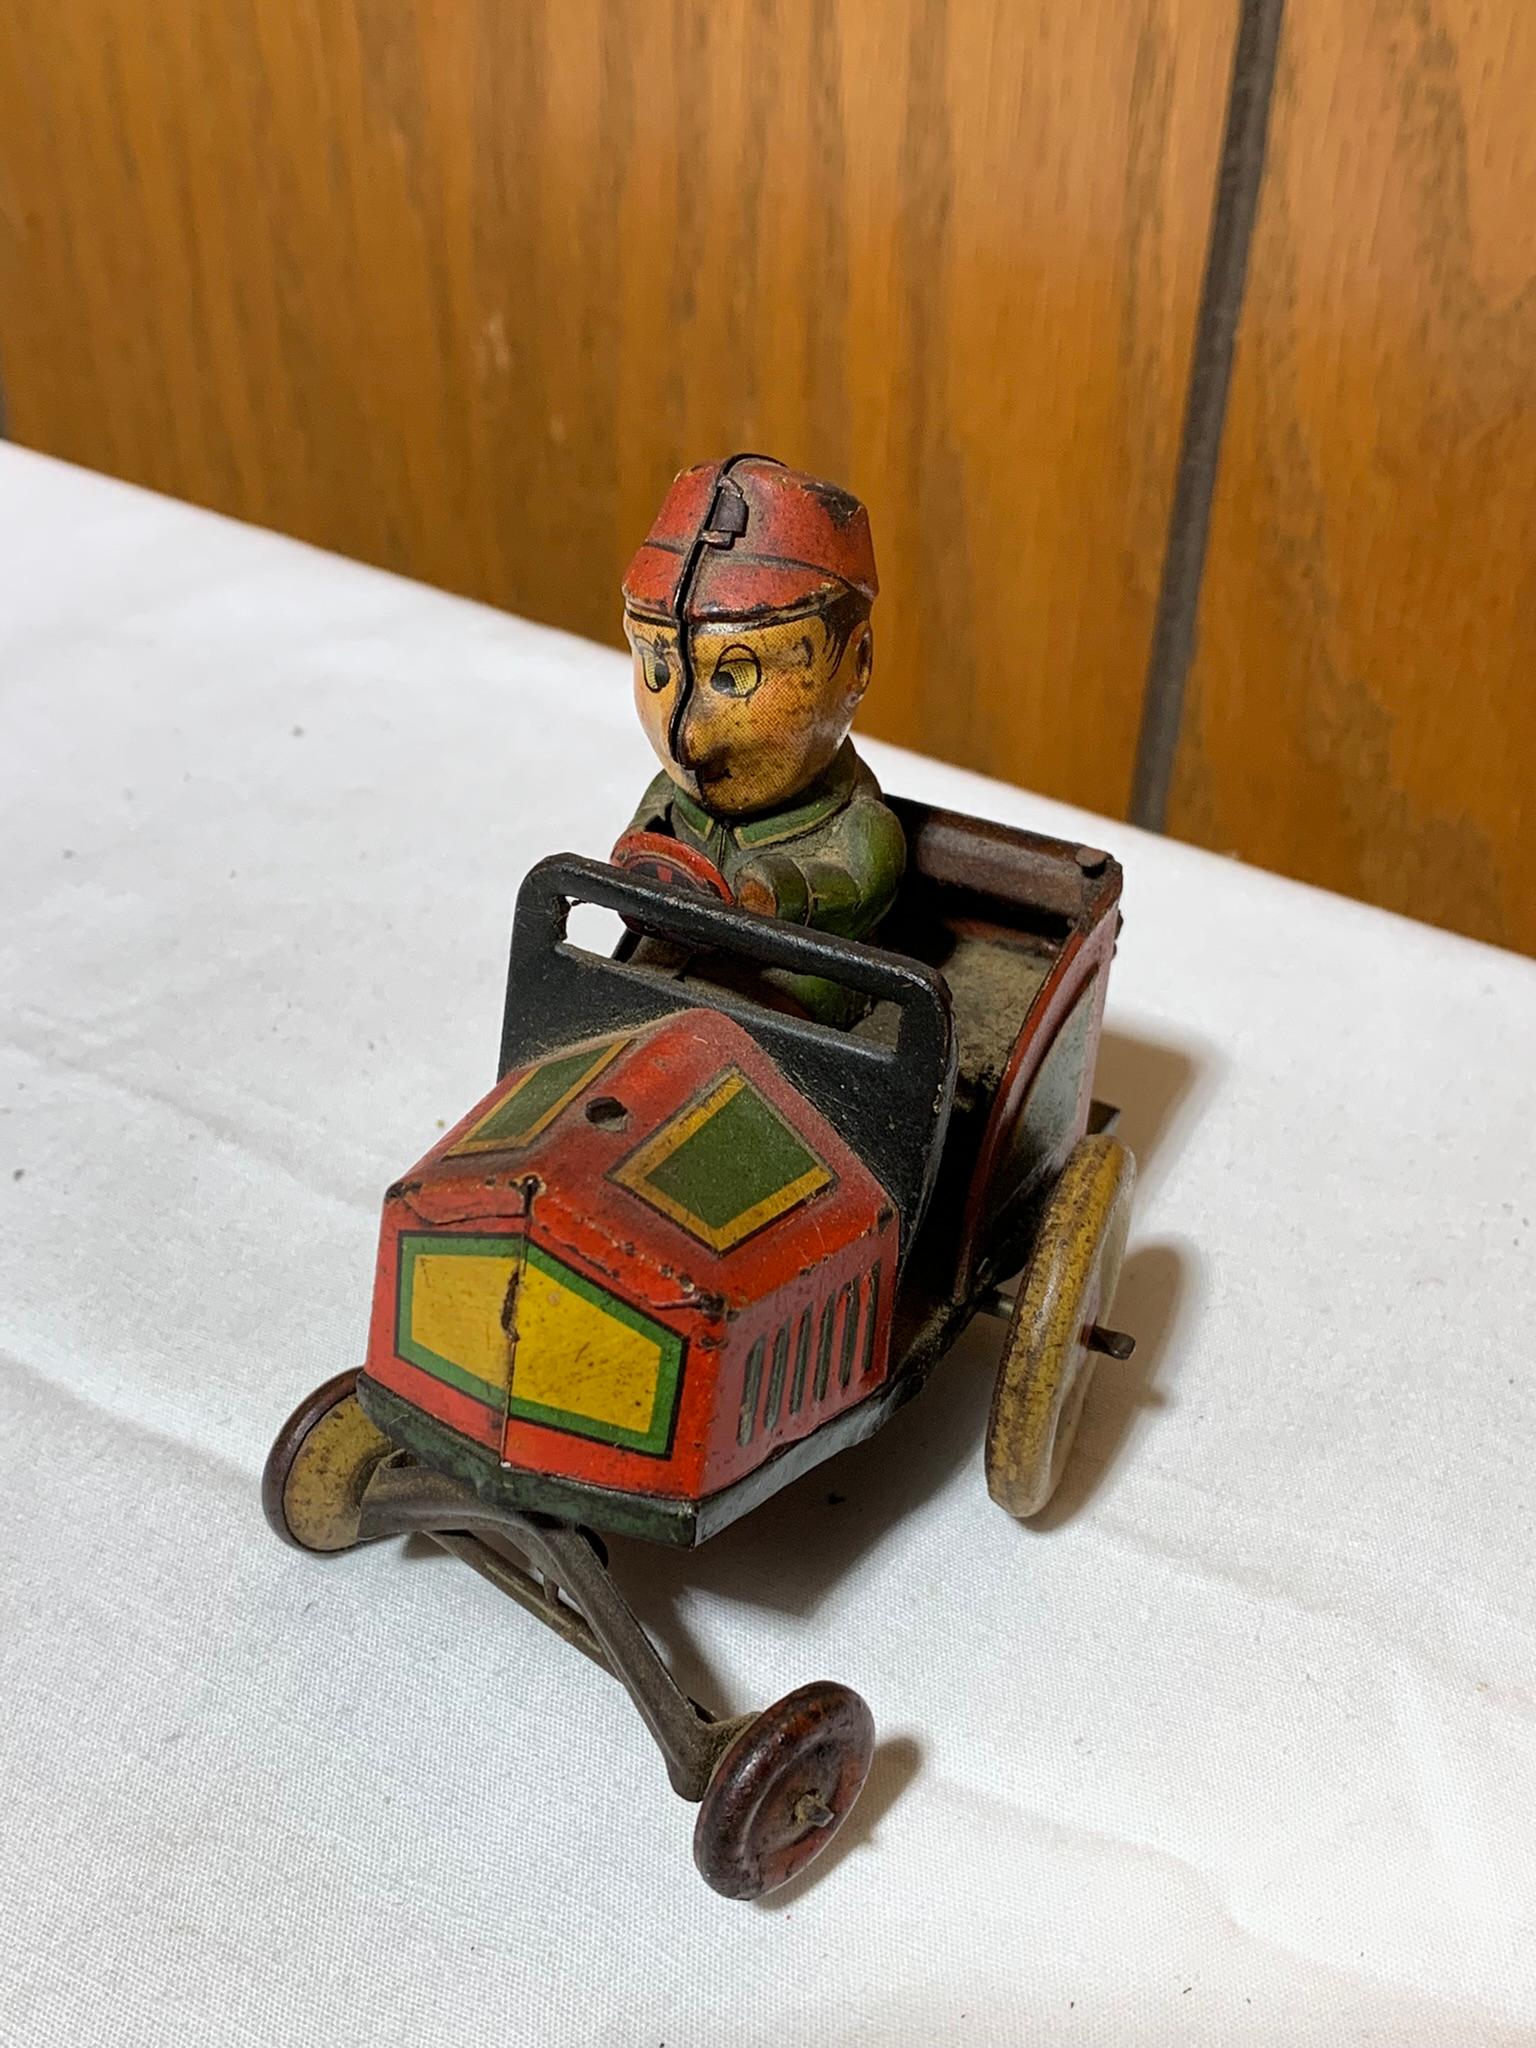 Vintage Windup Tin Toy - not in working order